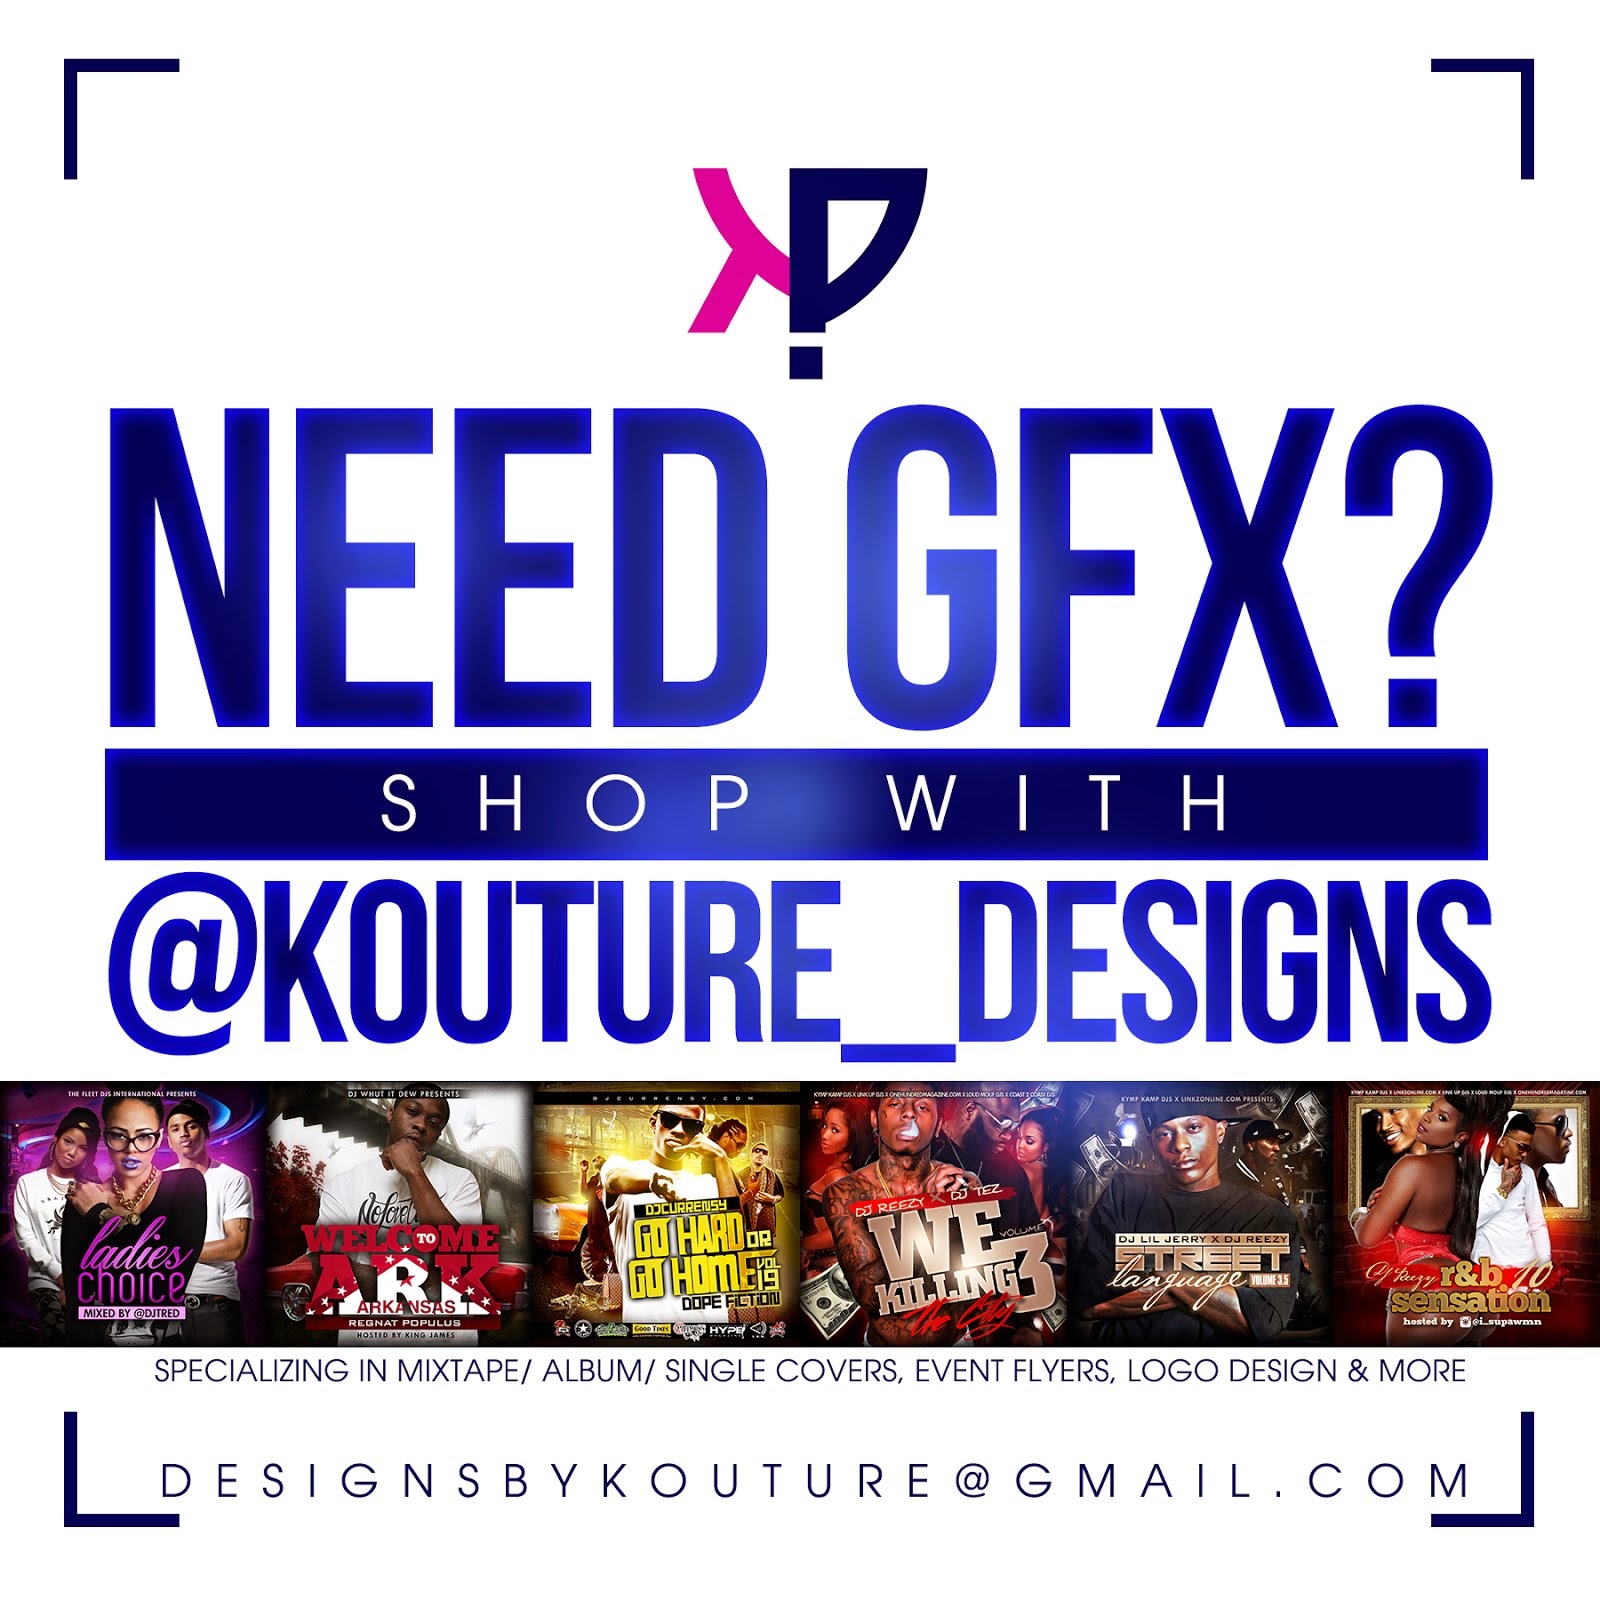 NEED GRAPHICS? HIT UP @KOUTURE_DESIGNS TODAY